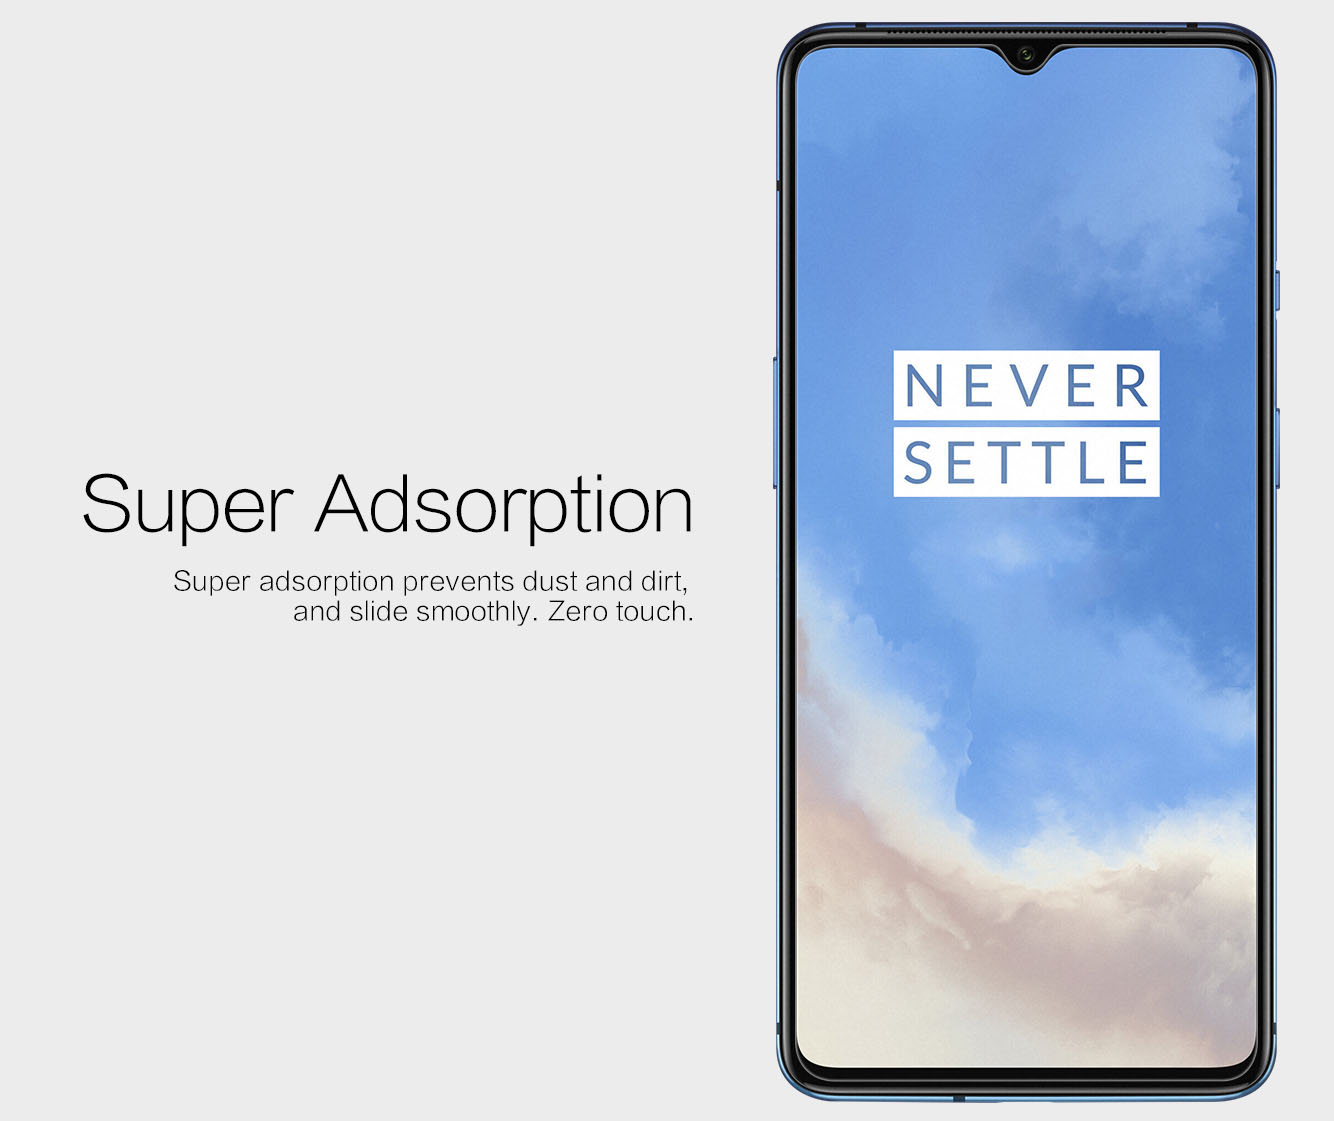 OnePlus 7T screen protector